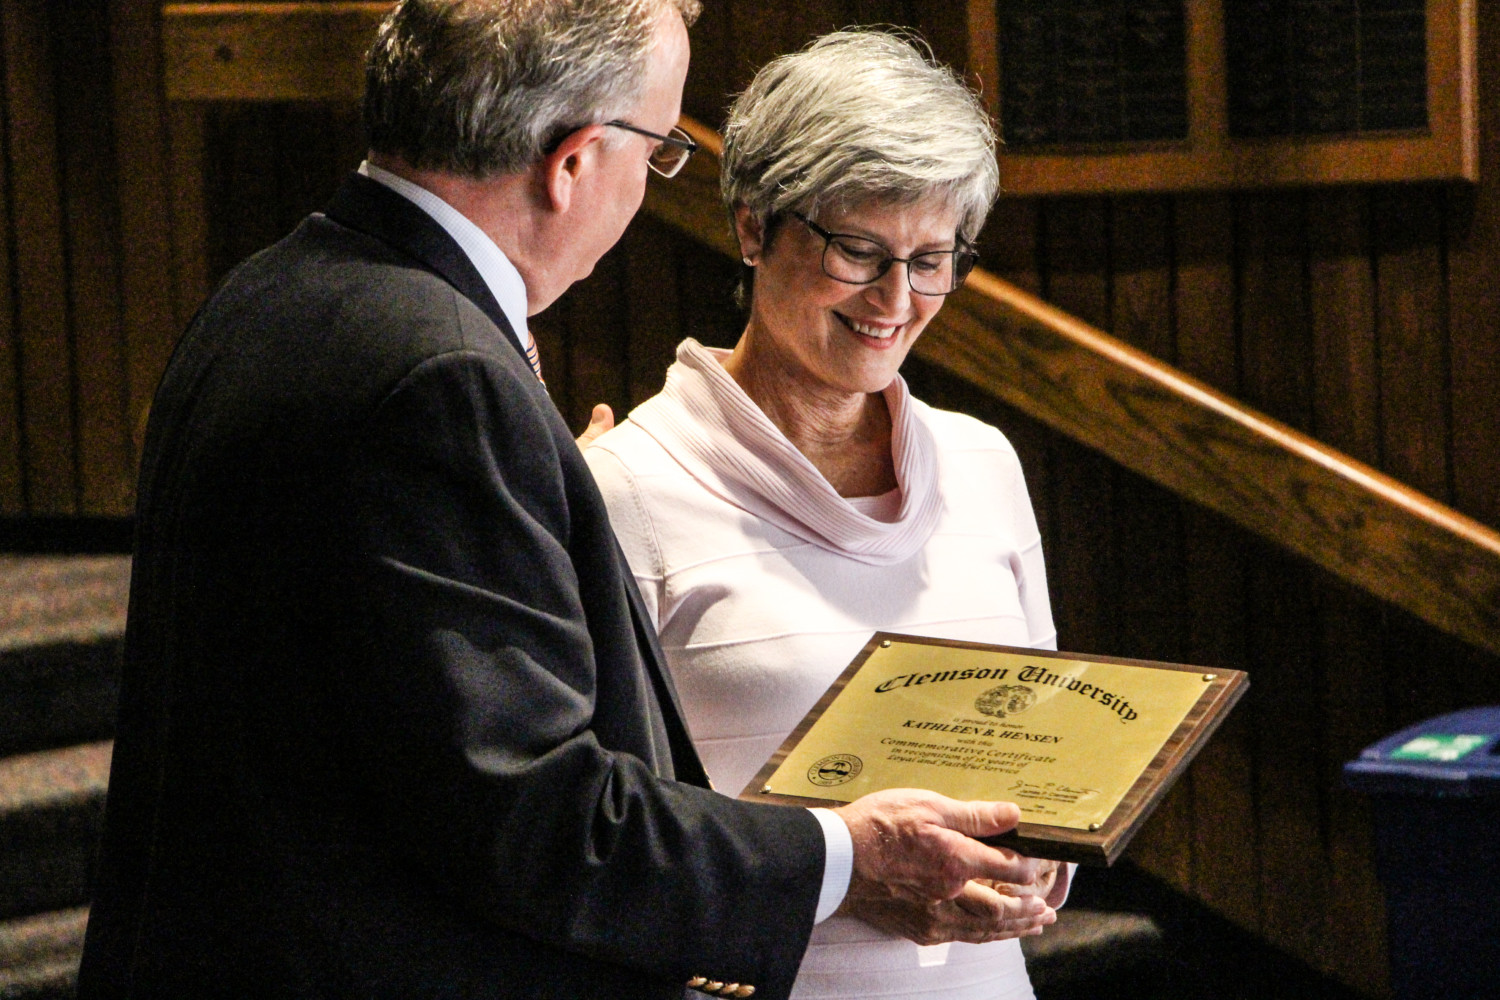 Kathy Hensen, administrative coordinator for the Office of the Vice President for Student Affairs for 14 years, was honored during a retirement reception Monday, Oct. 29. Here, she accepts a plaque commemorating her service from Associate Vice President and Chief of Staff for Student Affairs, George Smith.